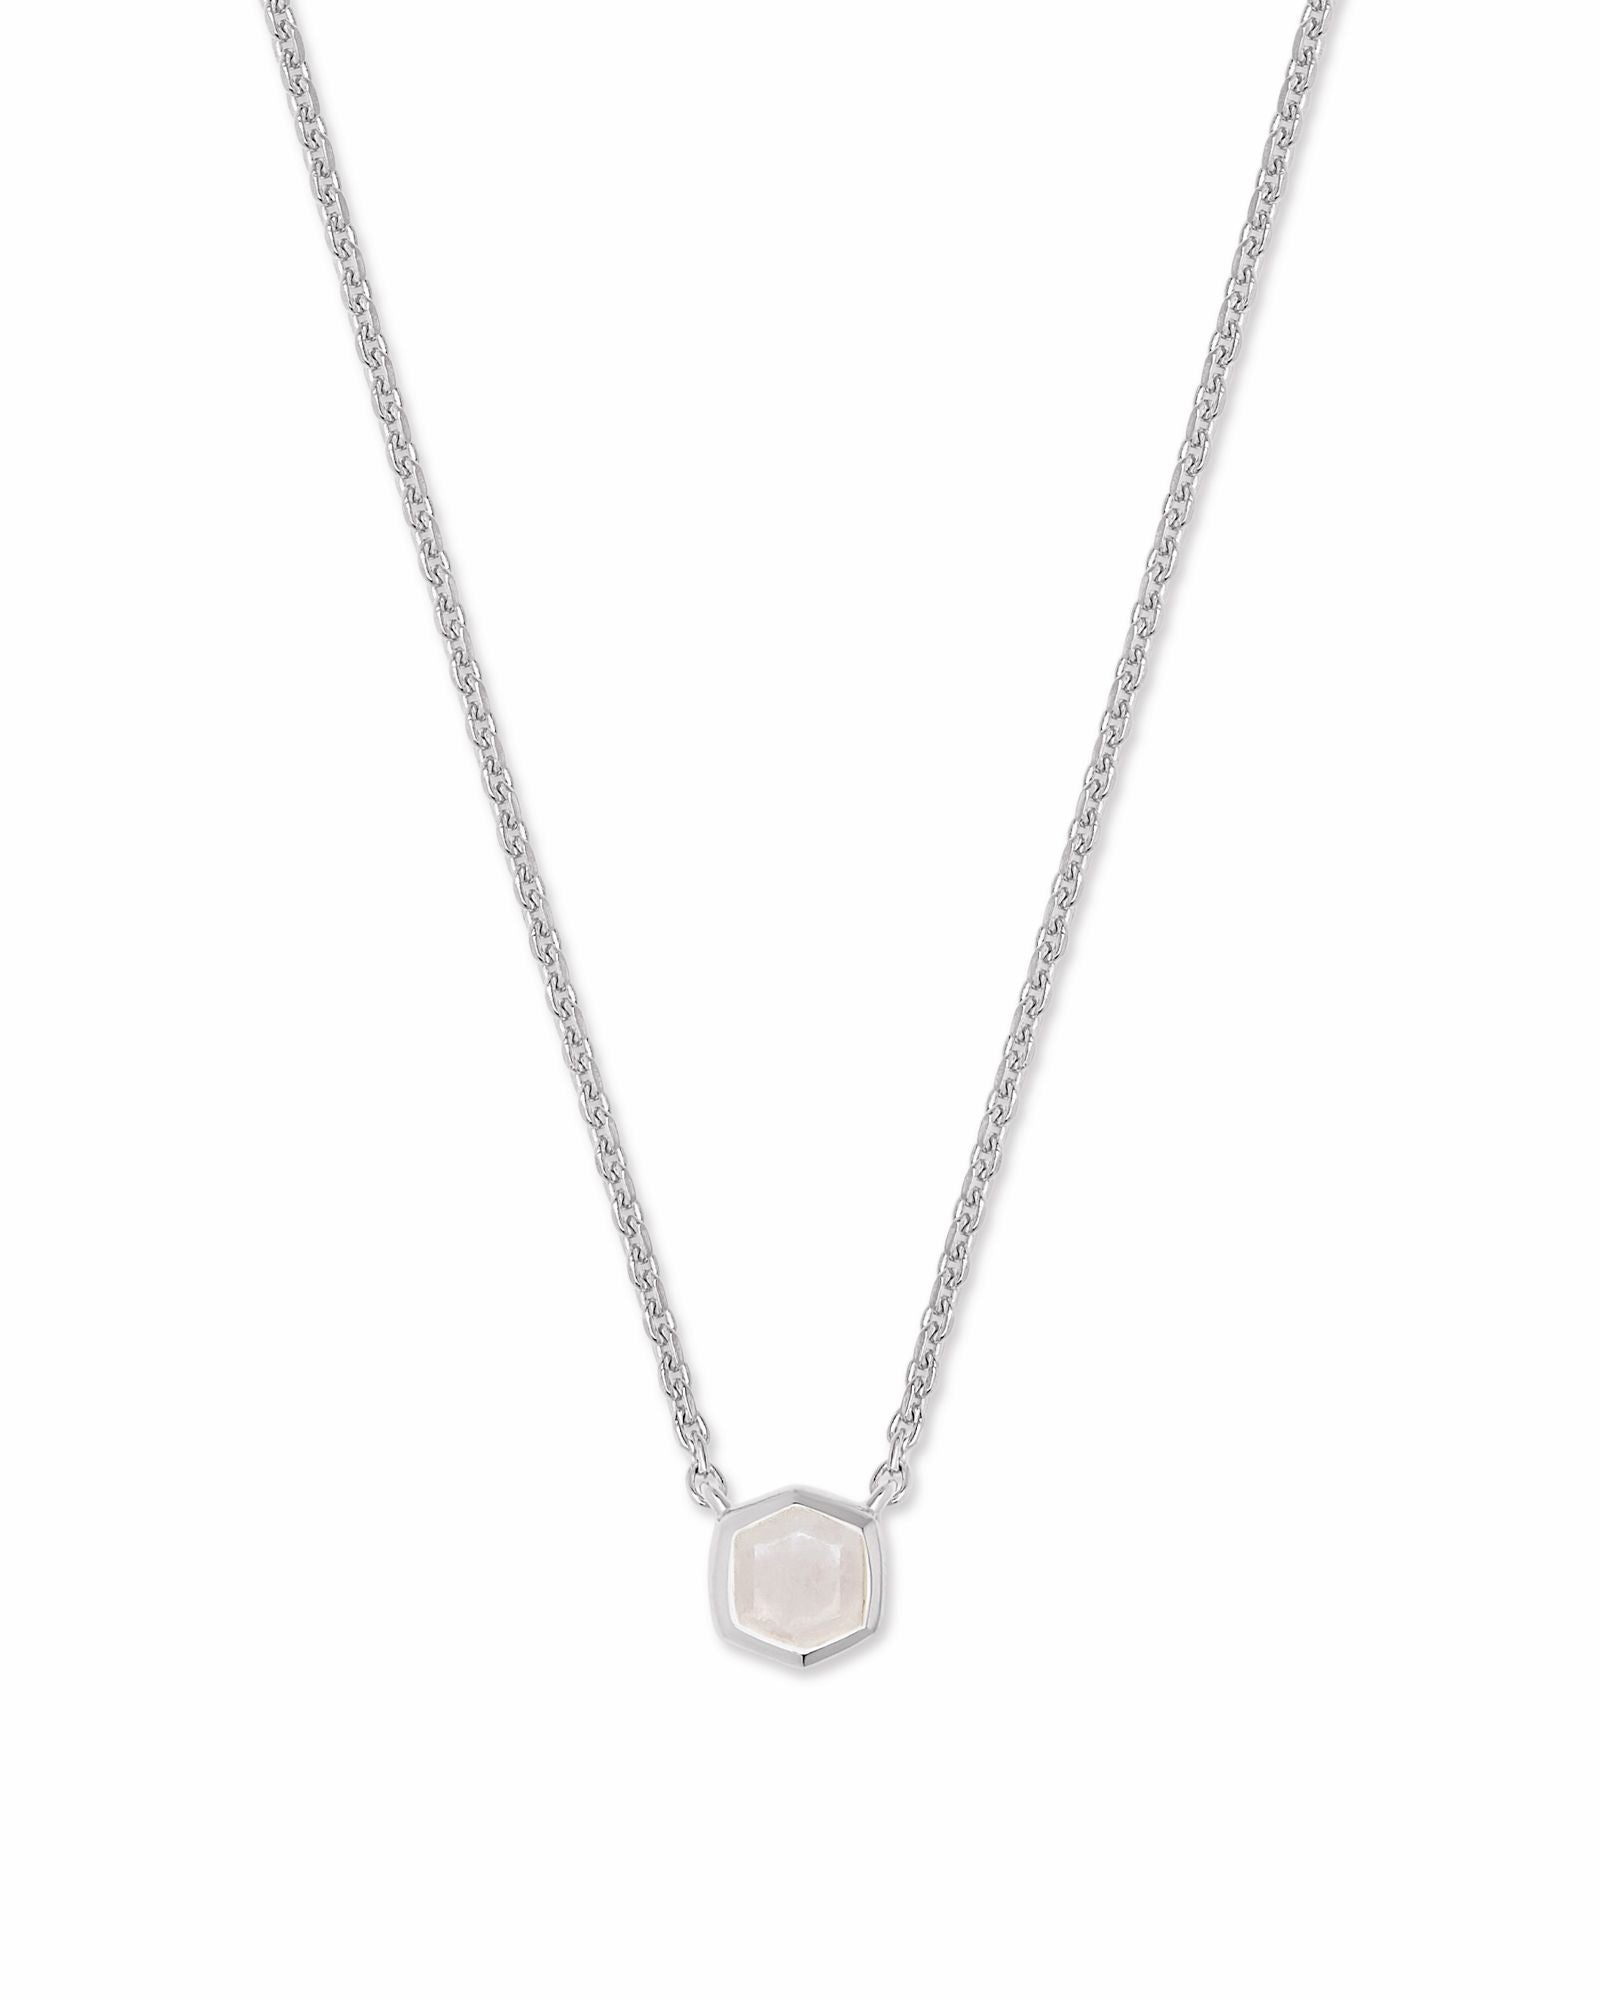 Davie Pendant Necklace in Sterling Silver Rainbow Moonstone